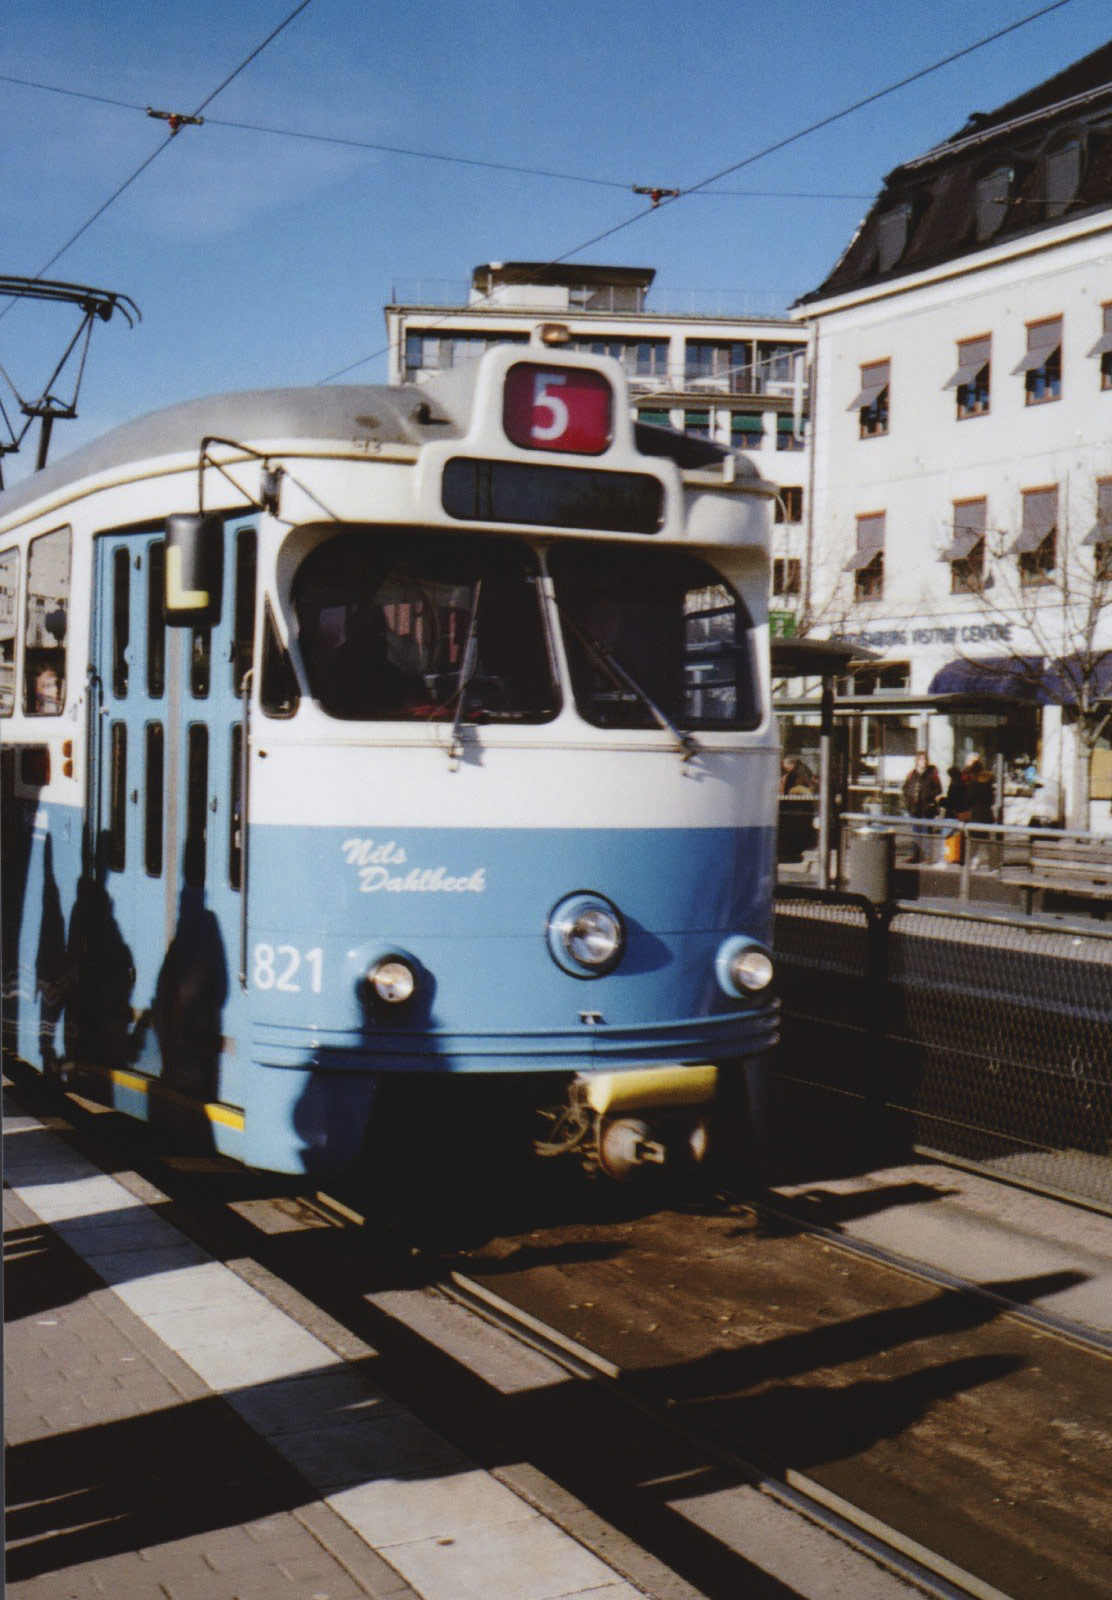 Blue and white tram